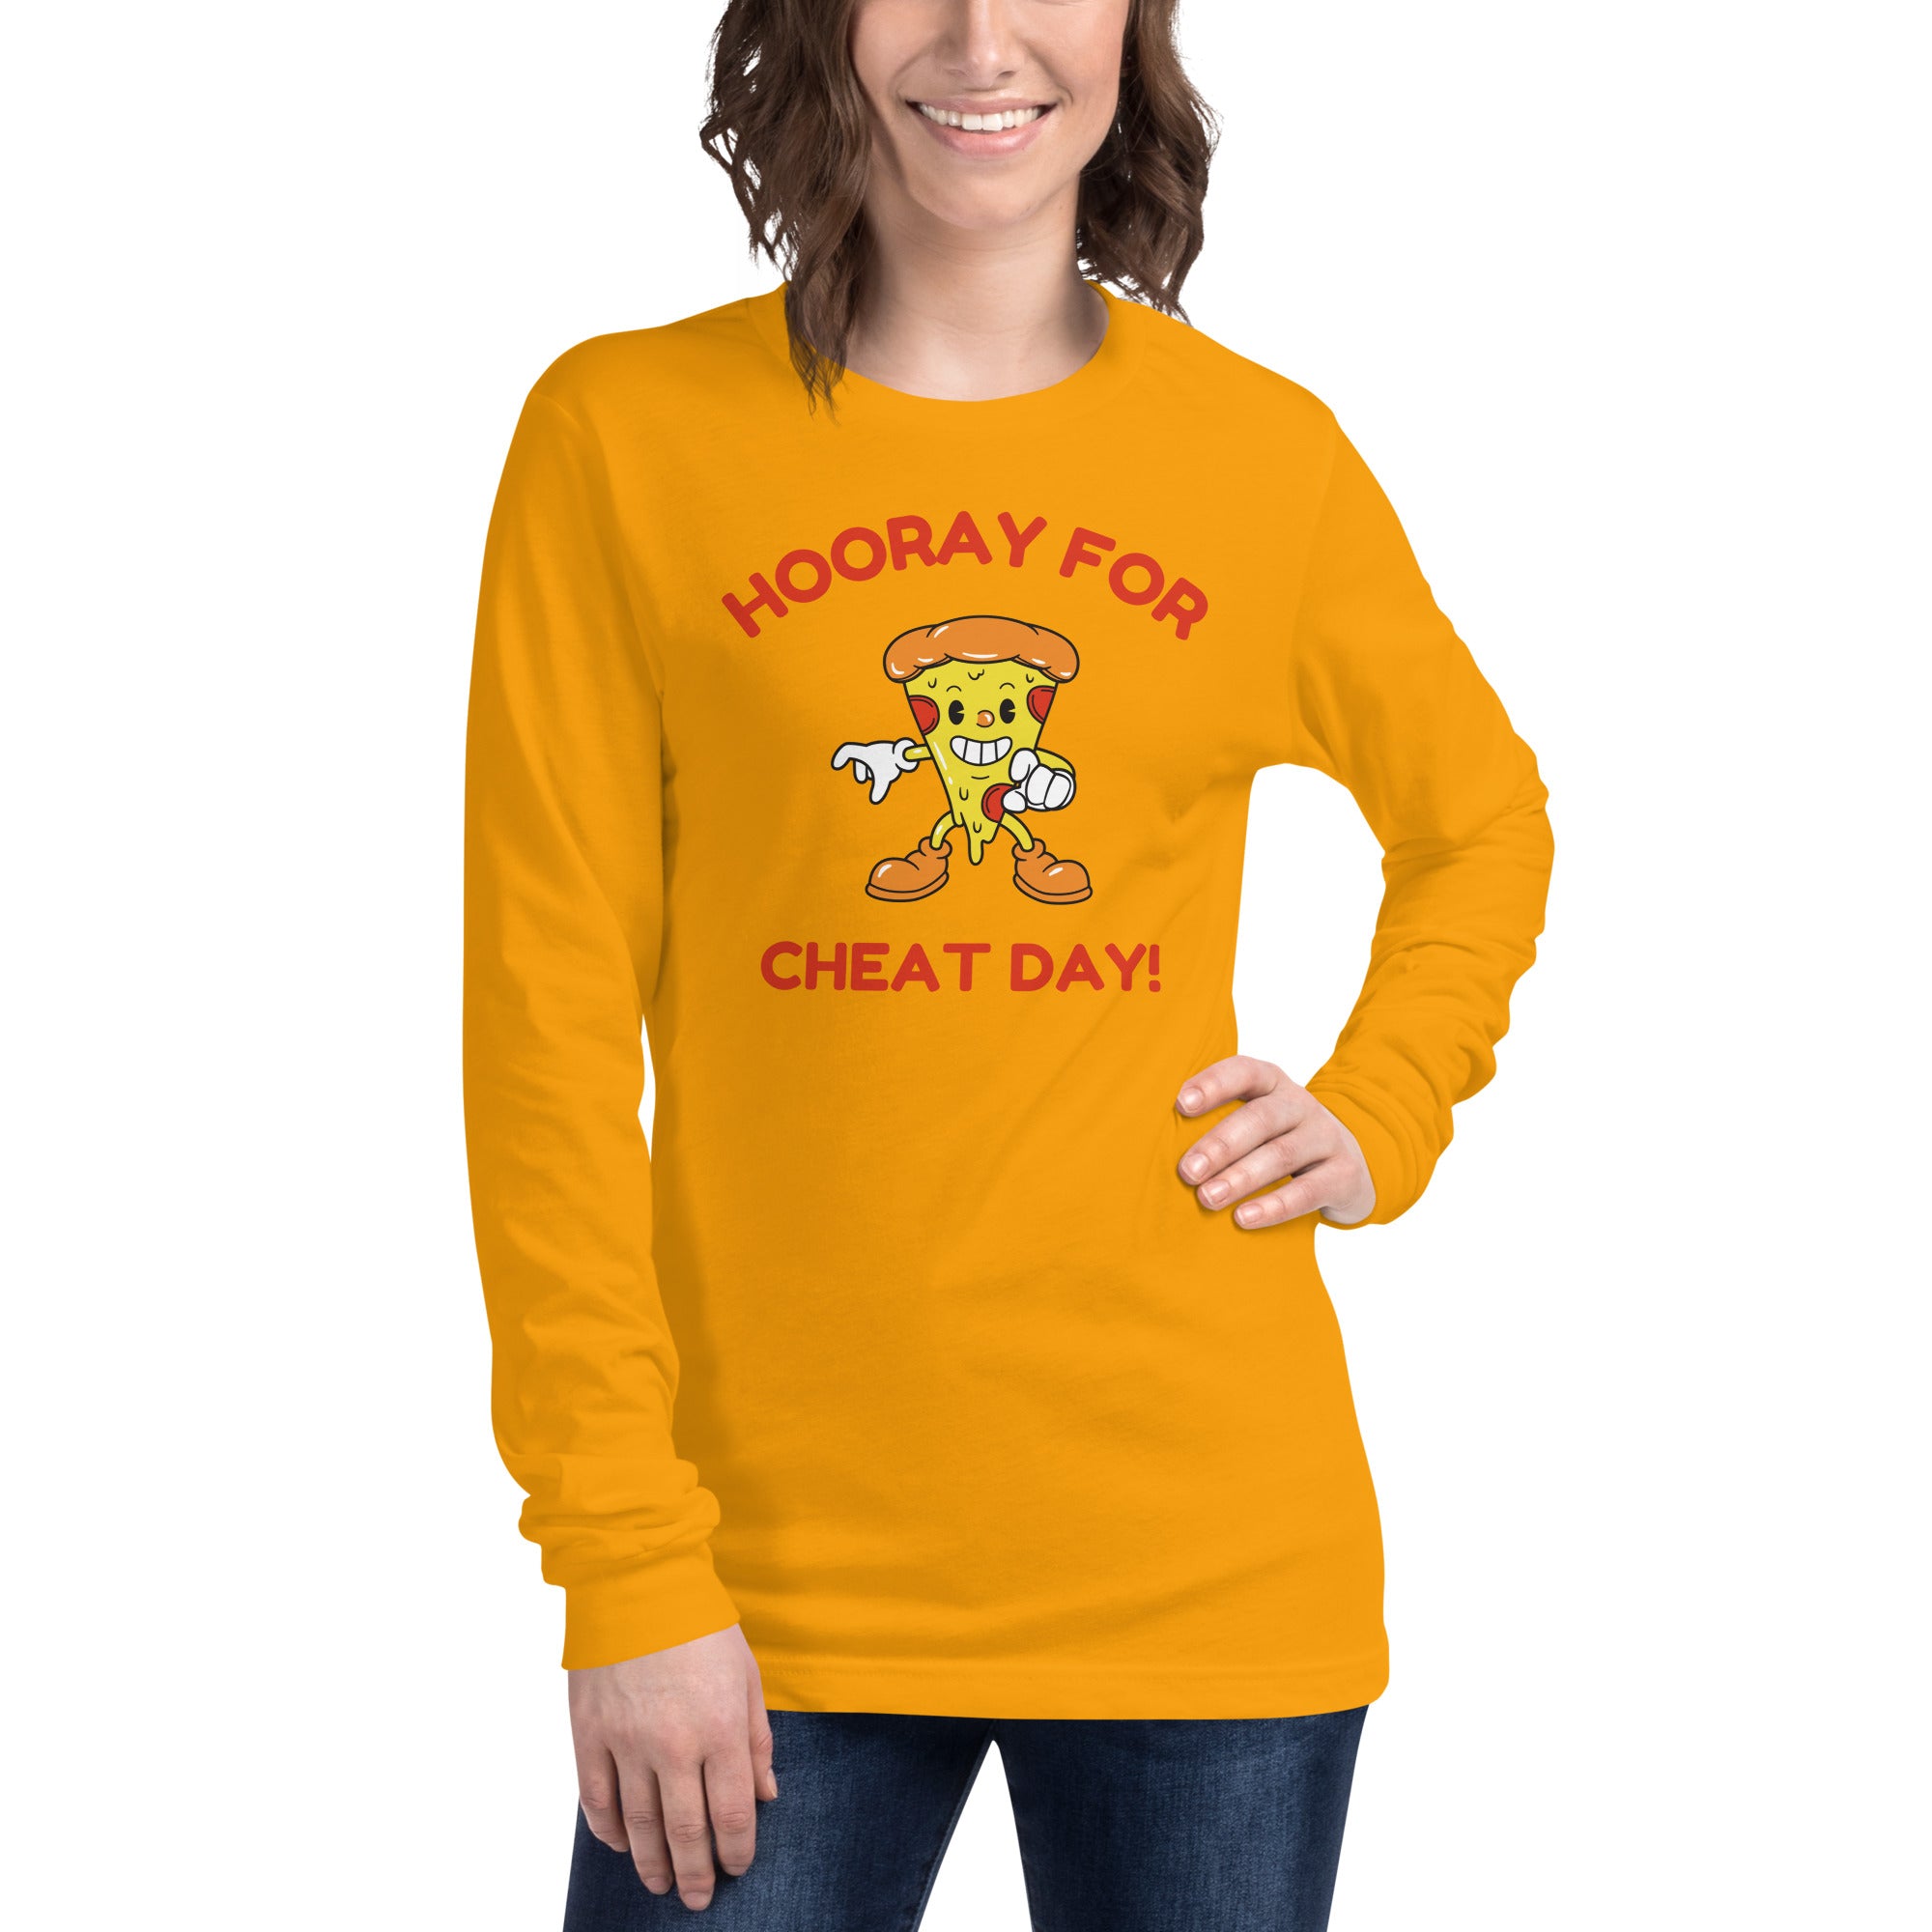 Hooray For Cheat Day! Women's Select Long Sleeve